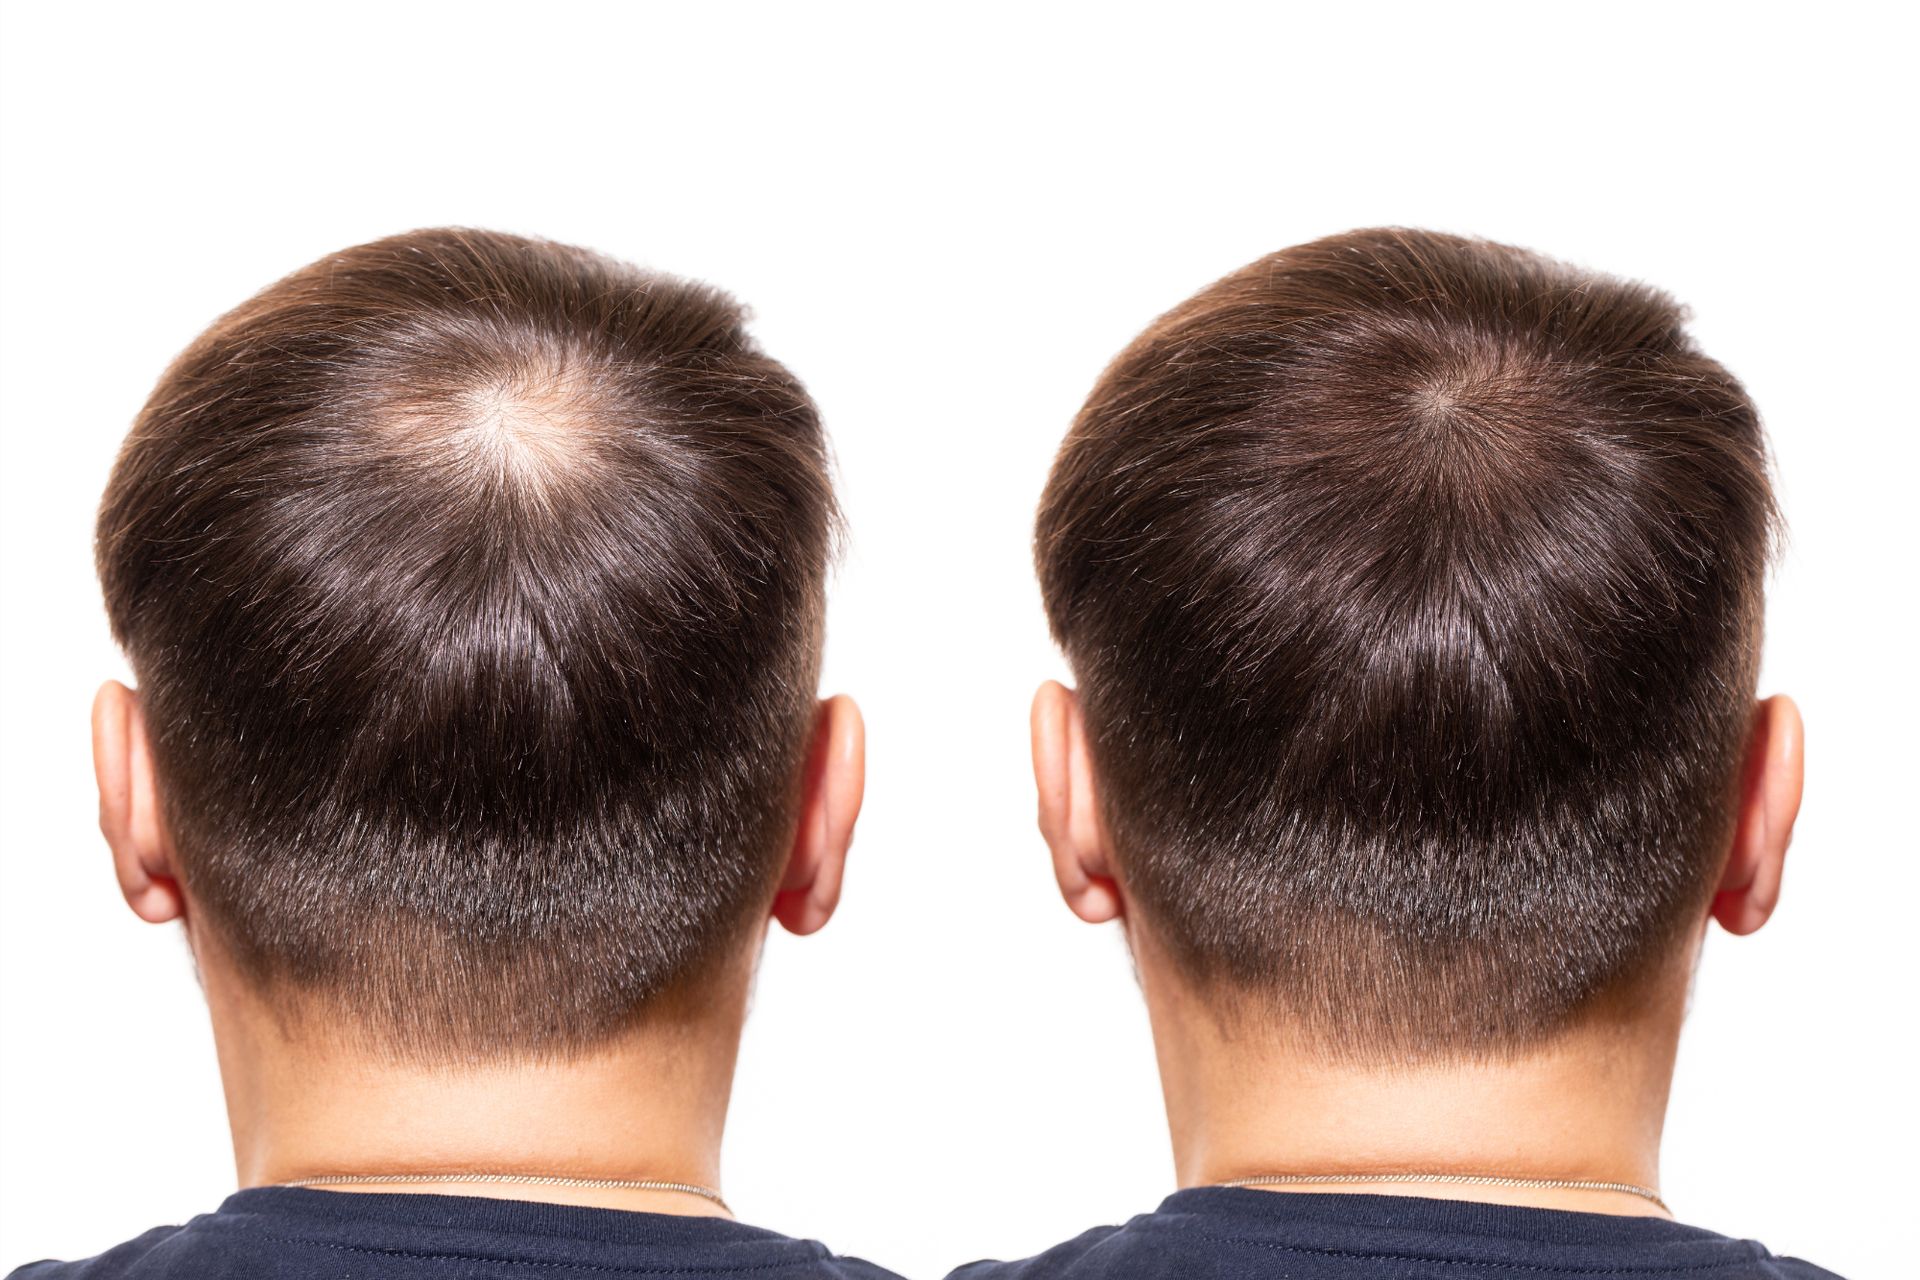 rear view of a man's head, showing bald spot before and after treatment for hair loss